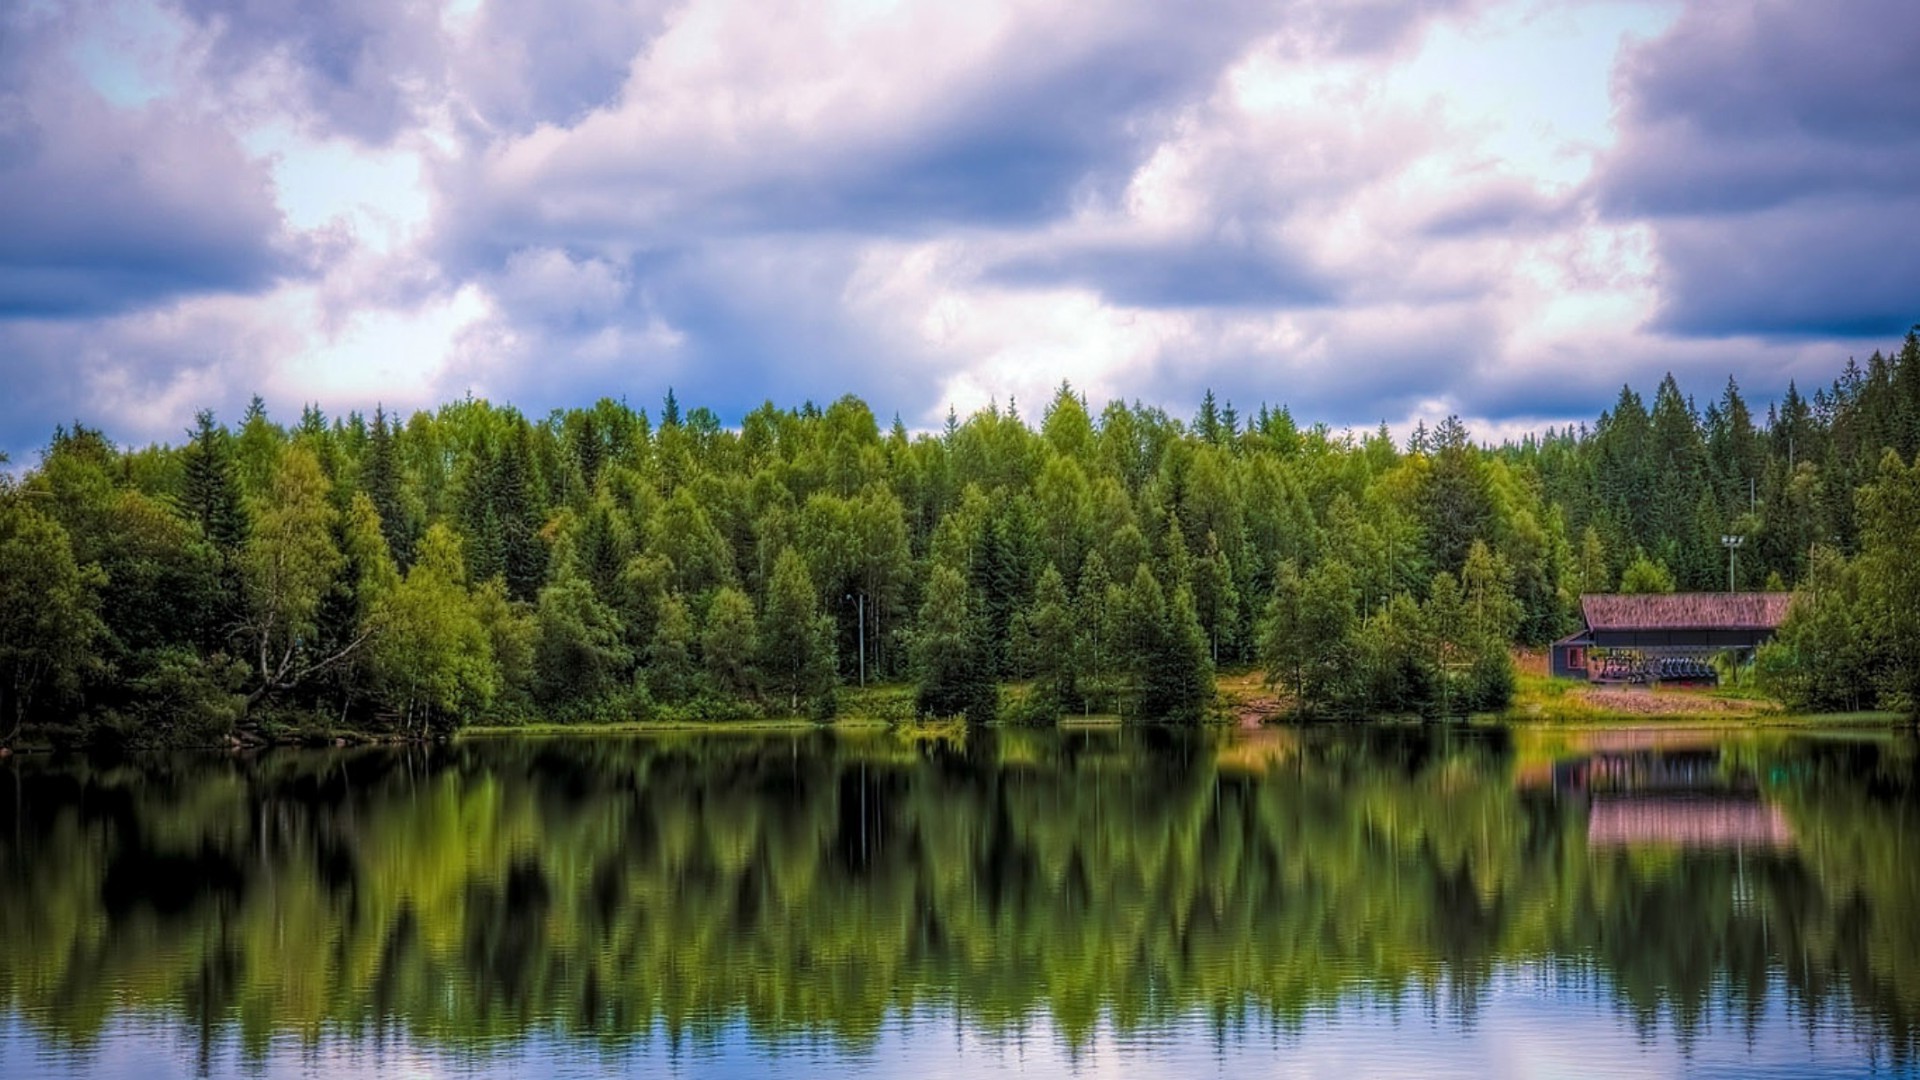 lake water nature wood reflection river landscape outdoors tree sky summer grass pool travel rural composure scenic